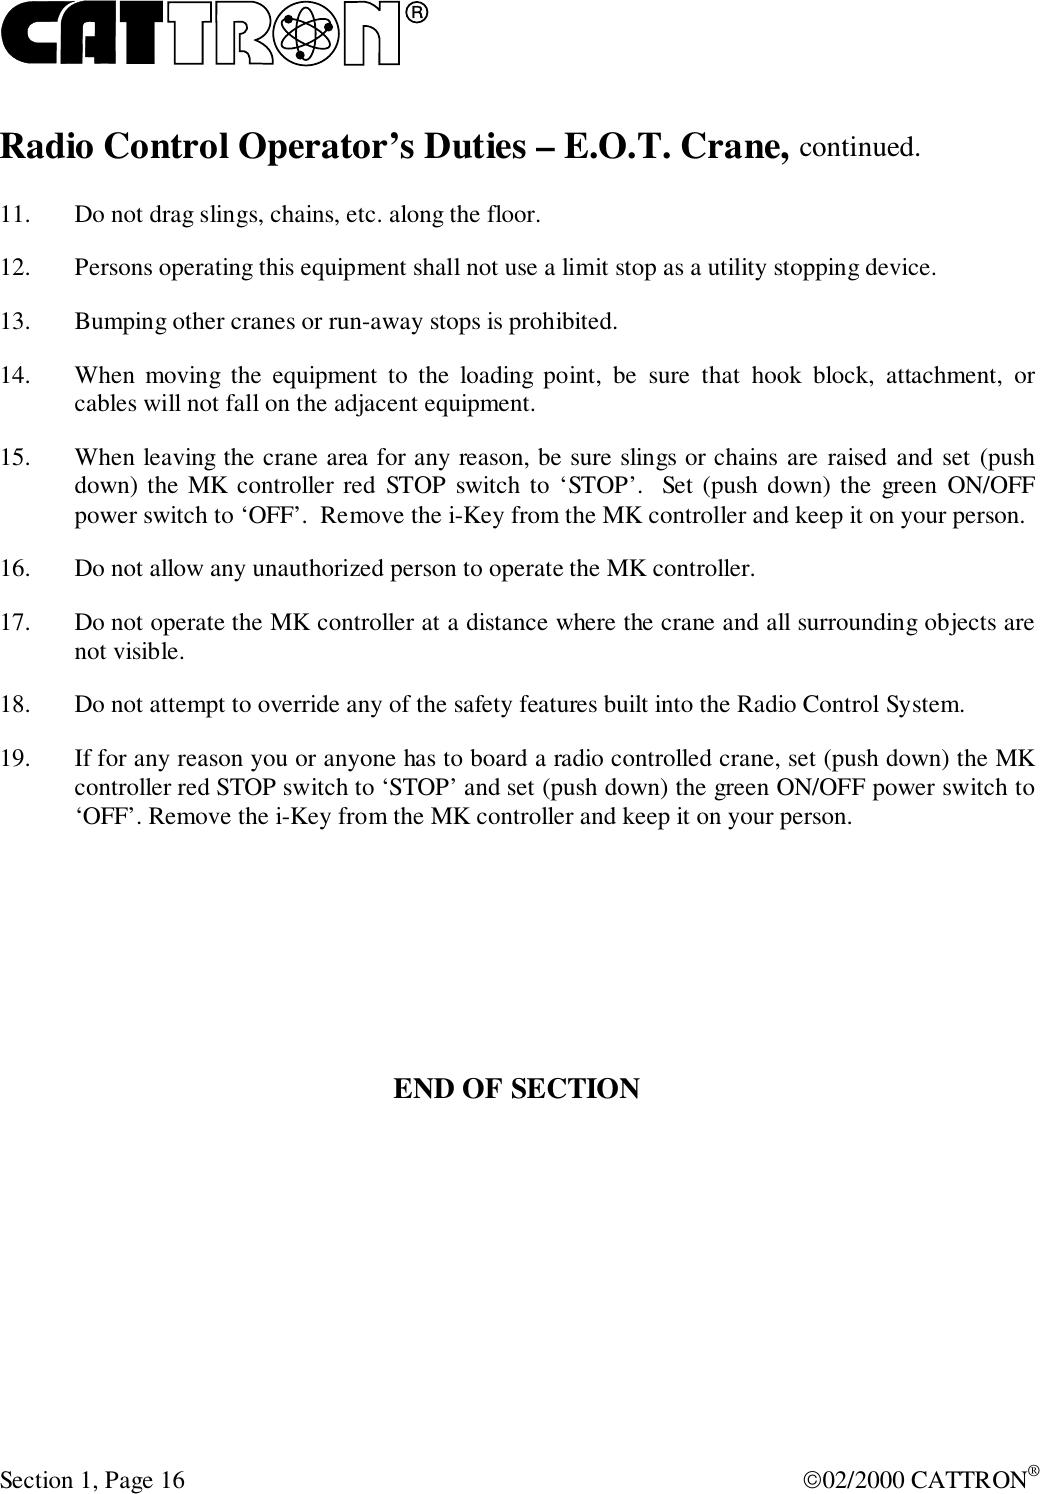 RSection 1, Page 16 02/2000 CATTRON®Radio Control Operator’s Duties – E.O.T. Crane, continued.11. Do not drag slings, chains, etc. along the floor.12. Persons operating this equipment shall not use a limit stop as a utility stopping device.13. Bumping other cranes or run-away stops is prohibited.14. When moving the equipment to the loading point, be sure that hook block, attachment, orcables will not fall on the adjacent equipment.15. When leaving the crane area for any reason, be sure slings or chains are raised and set (pushdown) the MK controller red STOP switch to ‘STOP’.  Set (push down) the green ON/OFFpower switch to ‘OFF’.  Remove the i-Key from the MK controller and keep it on your person.16. Do not allow any unauthorized person to operate the MK controller.17. Do not operate the MK controller at a distance where the crane and all surrounding objects arenot visible.18. Do not attempt to override any of the safety features built into the Radio Control System.19. If for any reason you or anyone has to board a radio controlled crane, set (push down) the MKcontroller red STOP switch to ‘STOP’ and set (push down) the green ON/OFF power switch to‘OFF’. Remove the i-Key from the MK controller and keep it on your person.END OF SECTION